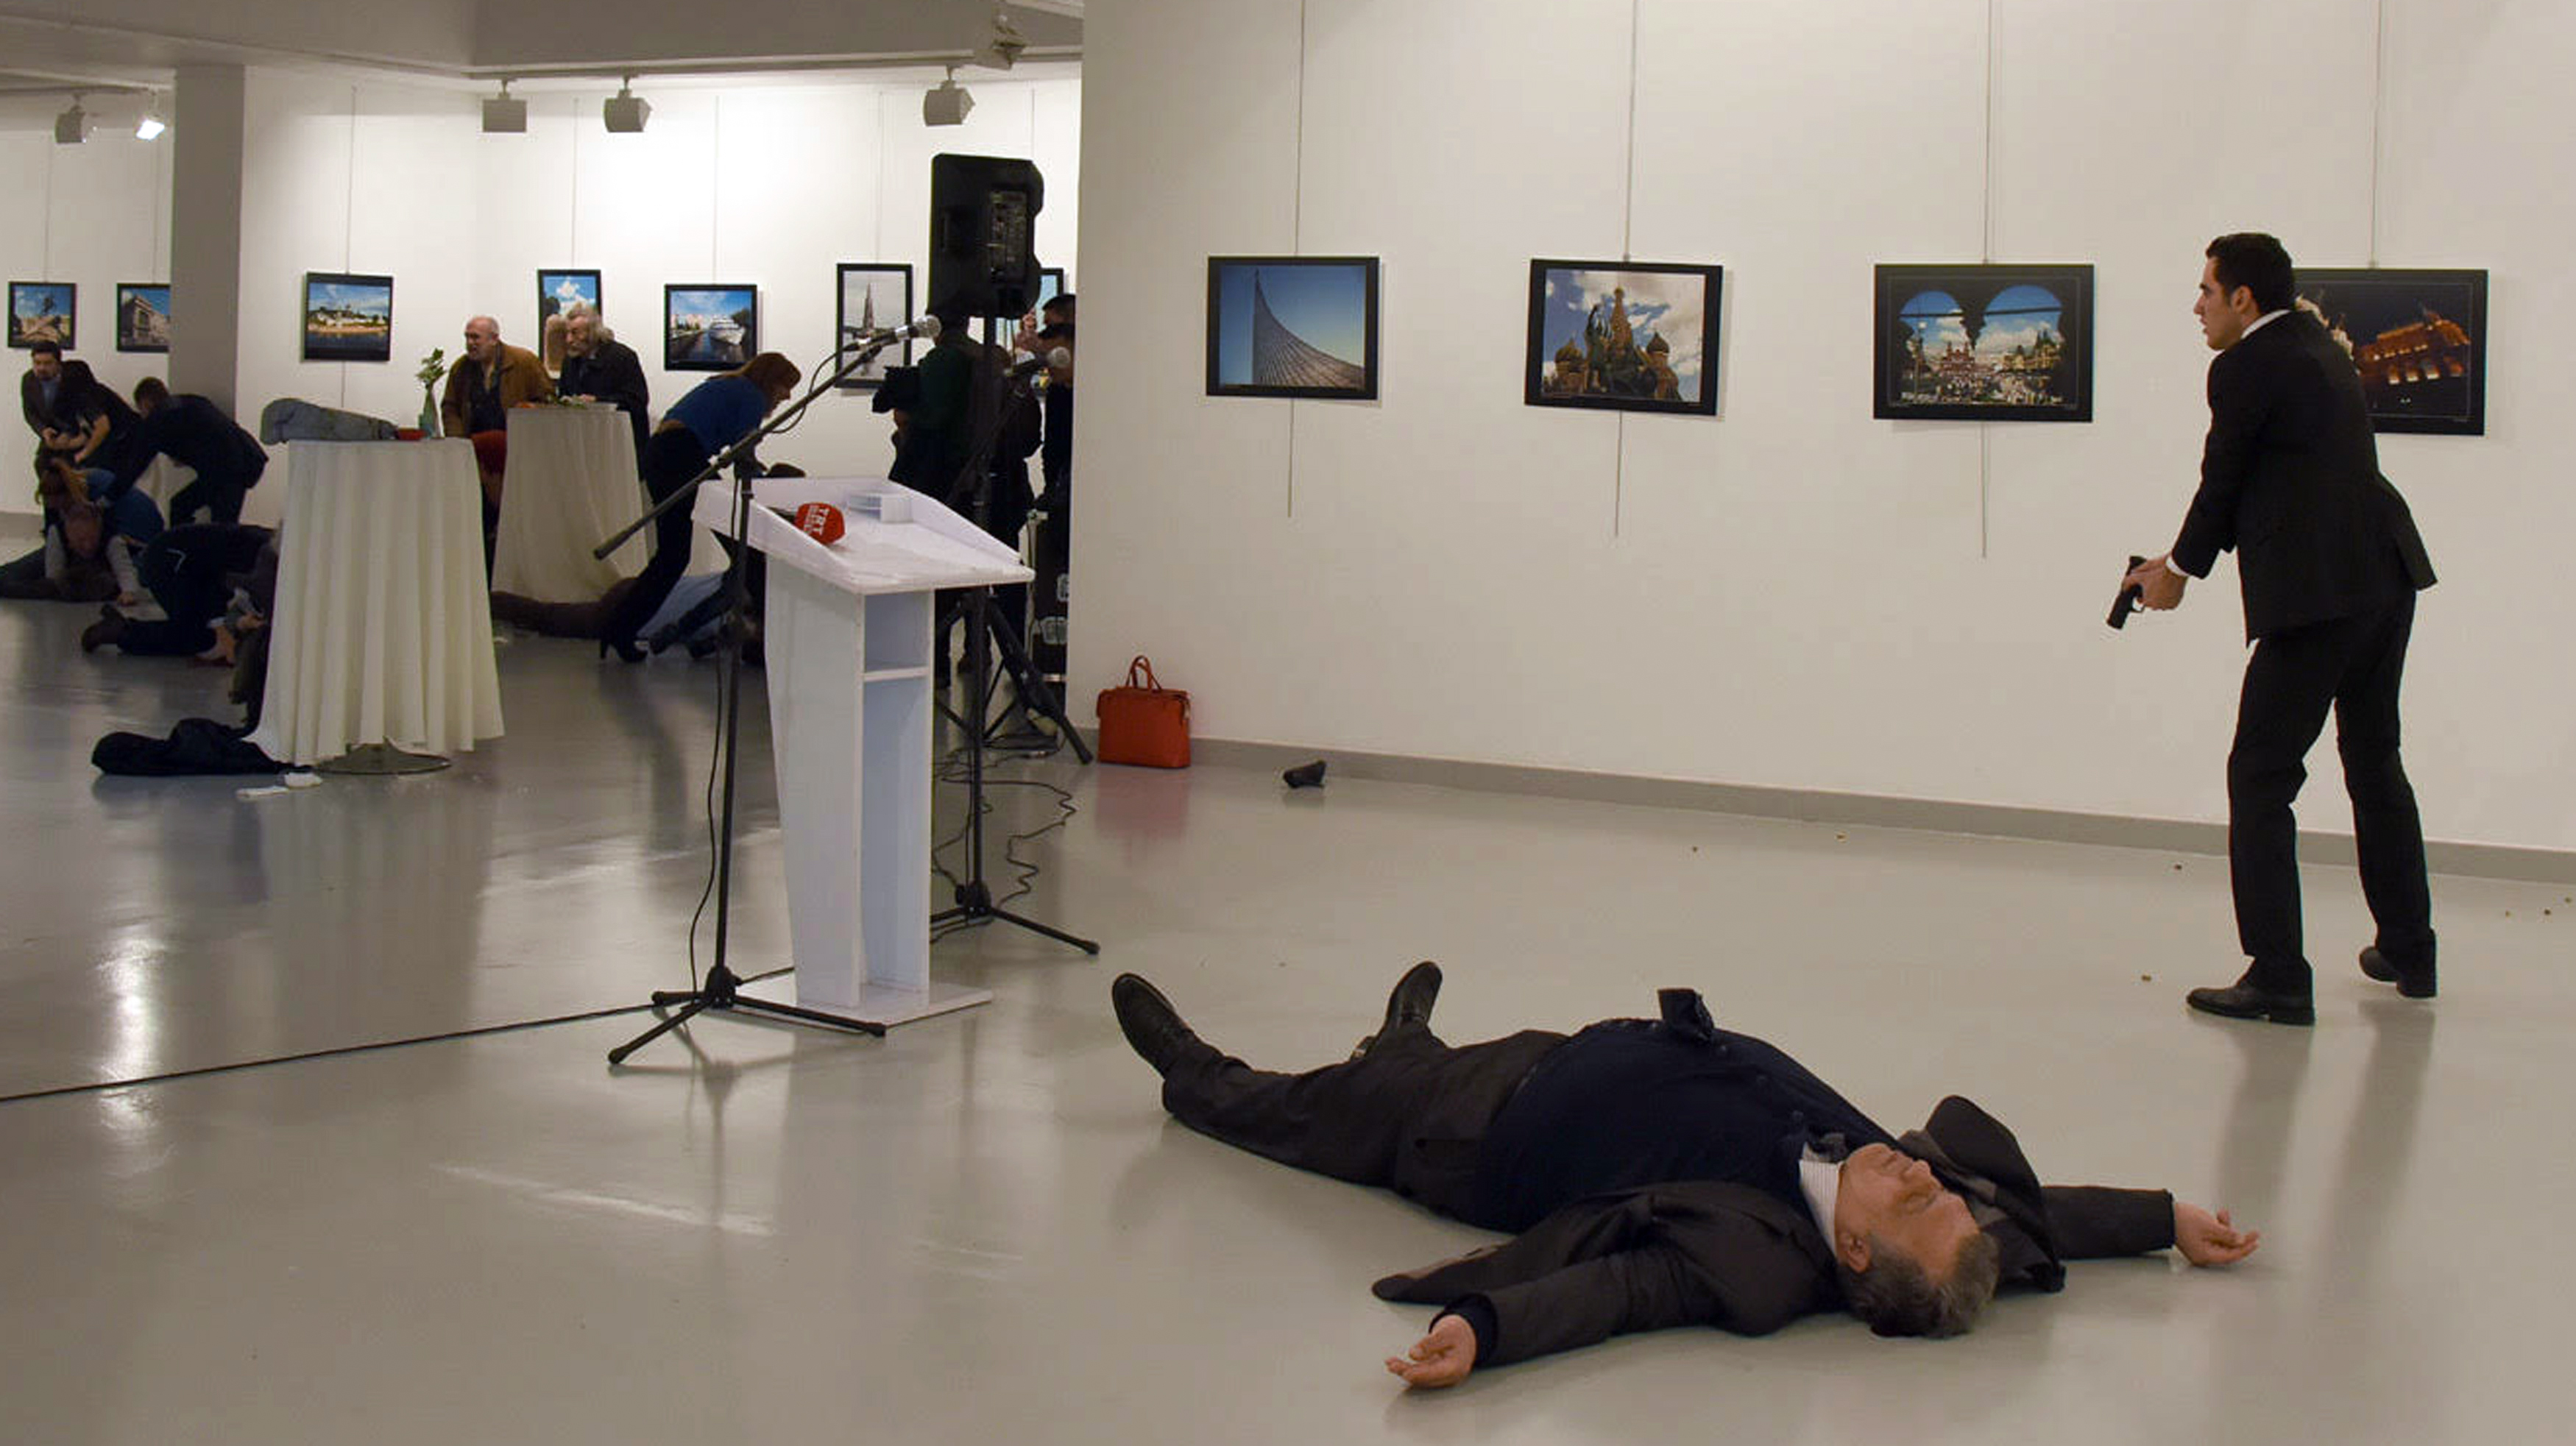 EDITORS NOTE: Graphic content / Andrey Karlov (front), the Russian ambassador to Ankara, lies on the floor next to his killer who still point his gun to people attending an art exhibition in Ankara, on December 19, 2016.  A gunman crying "Aleppo" and "revenge" shot Karlov while he was visiting an art exhibition in Ankara on December 19, witnesses and media reports said. The Turkish state-run Anadolu news agency said the gunman had been "neutralised" in a police operation, without giving further details. / AFP PHOTO / STRINGER